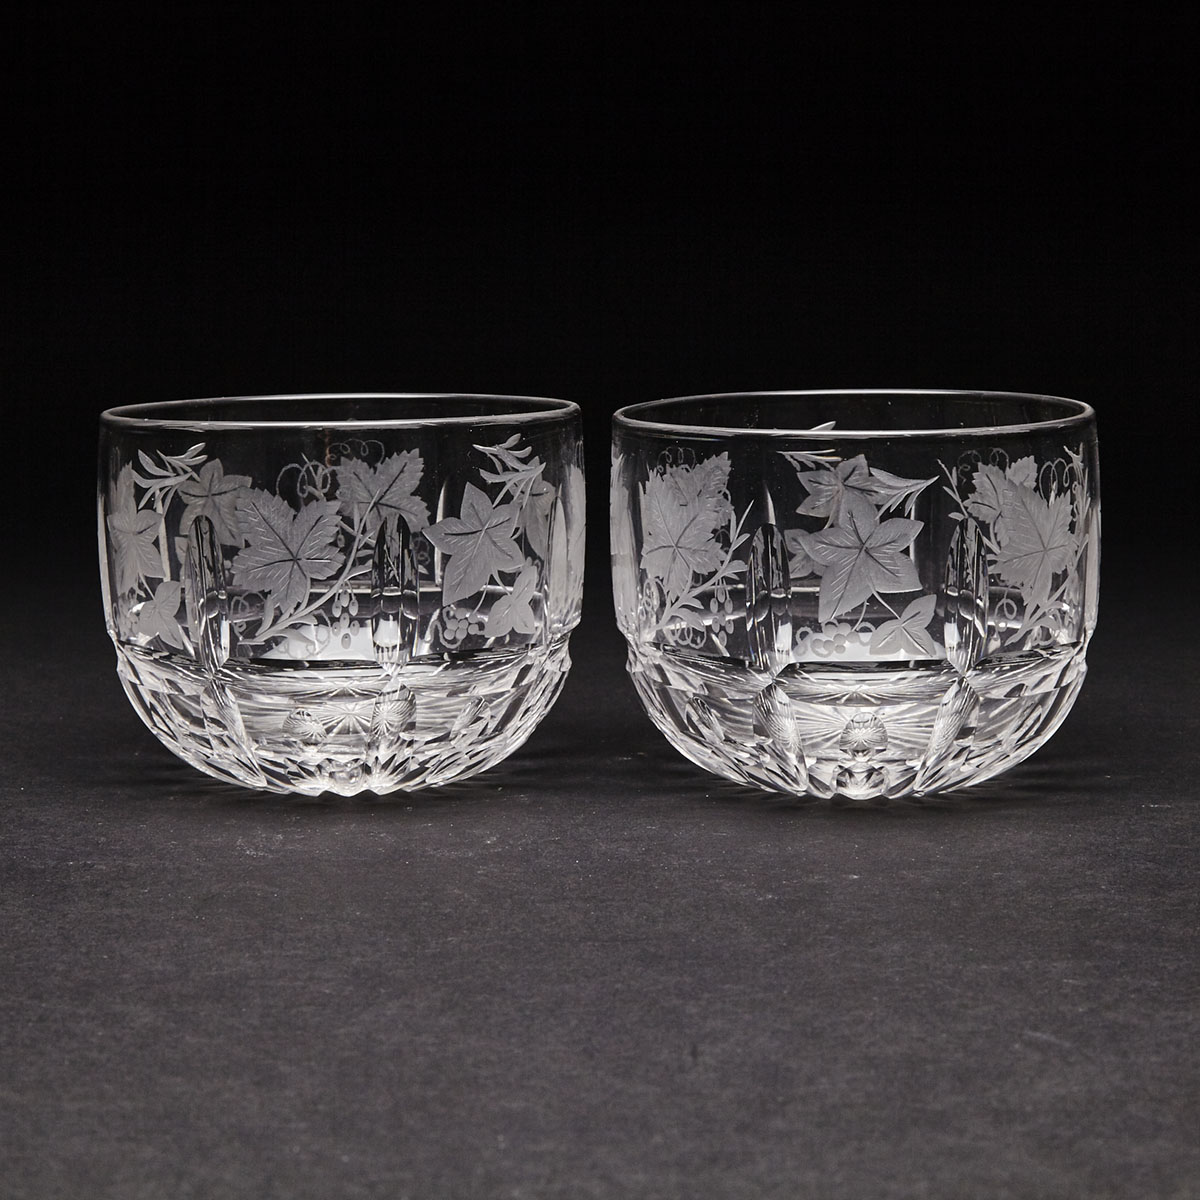 Pair of English Cut and Etched Glass Finger Bowls, late 19th century